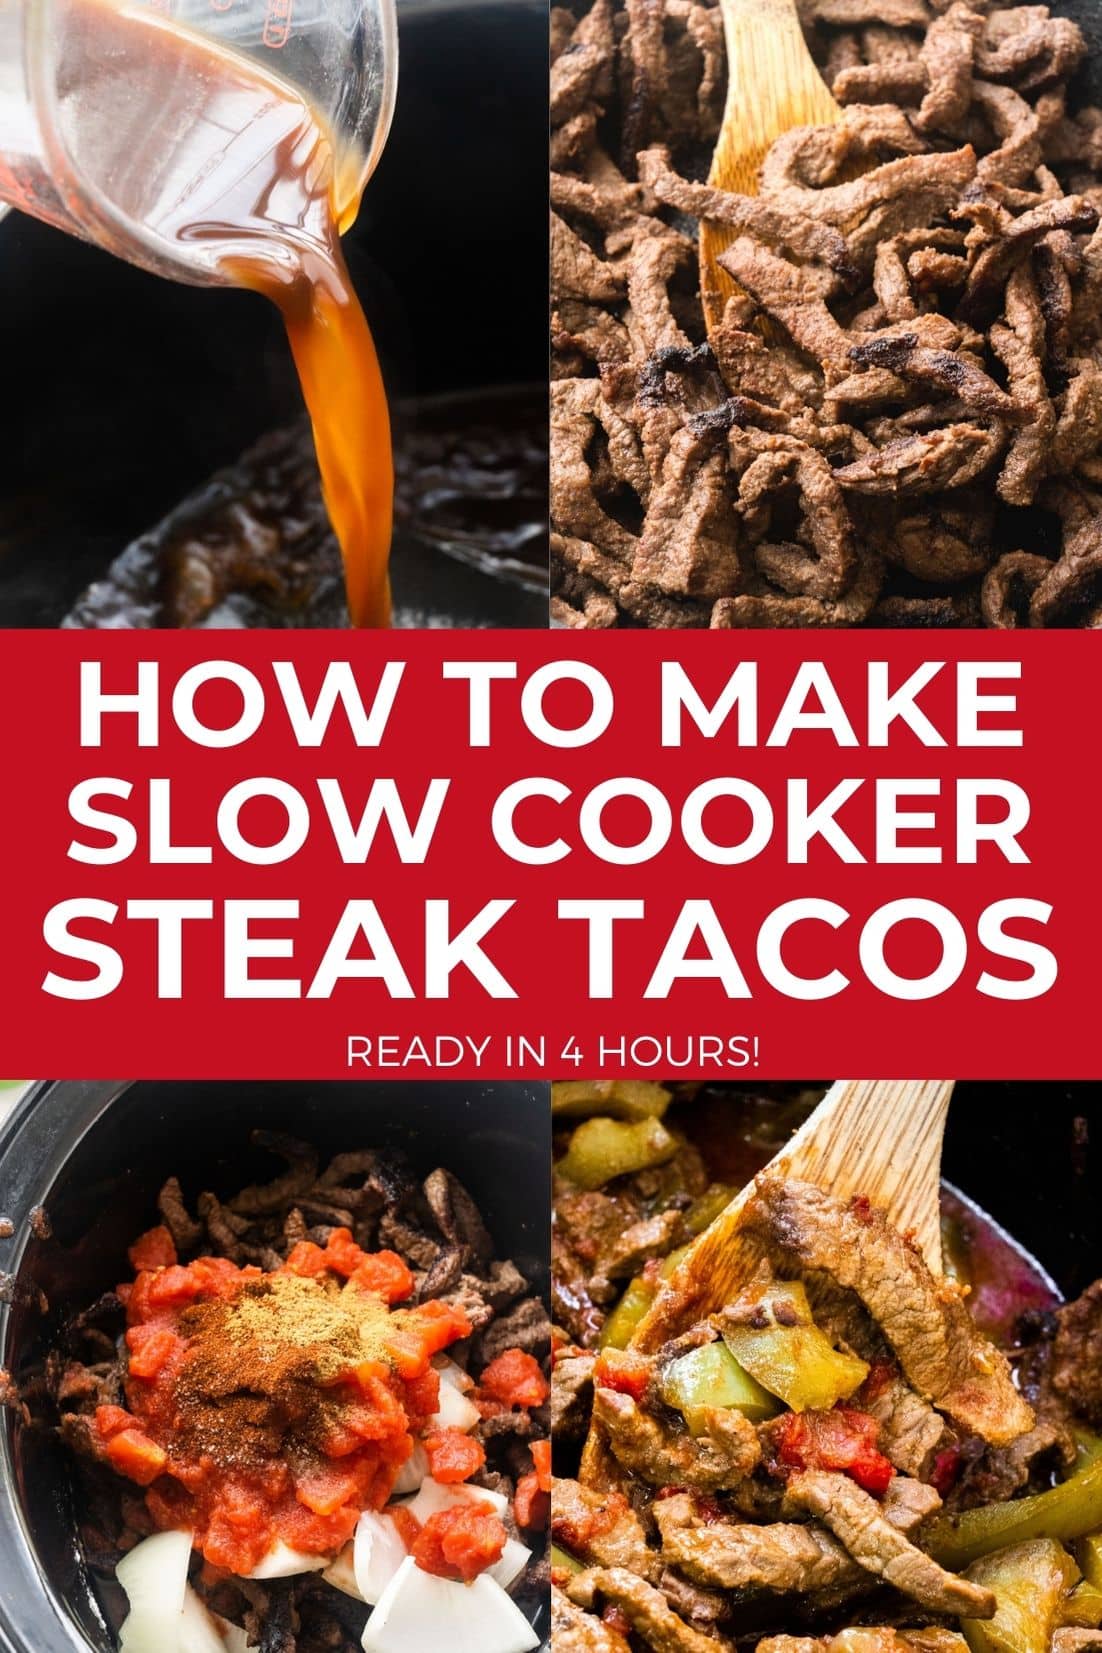 Slow Cooker Steak Tacos - Ready in 4 Hours!